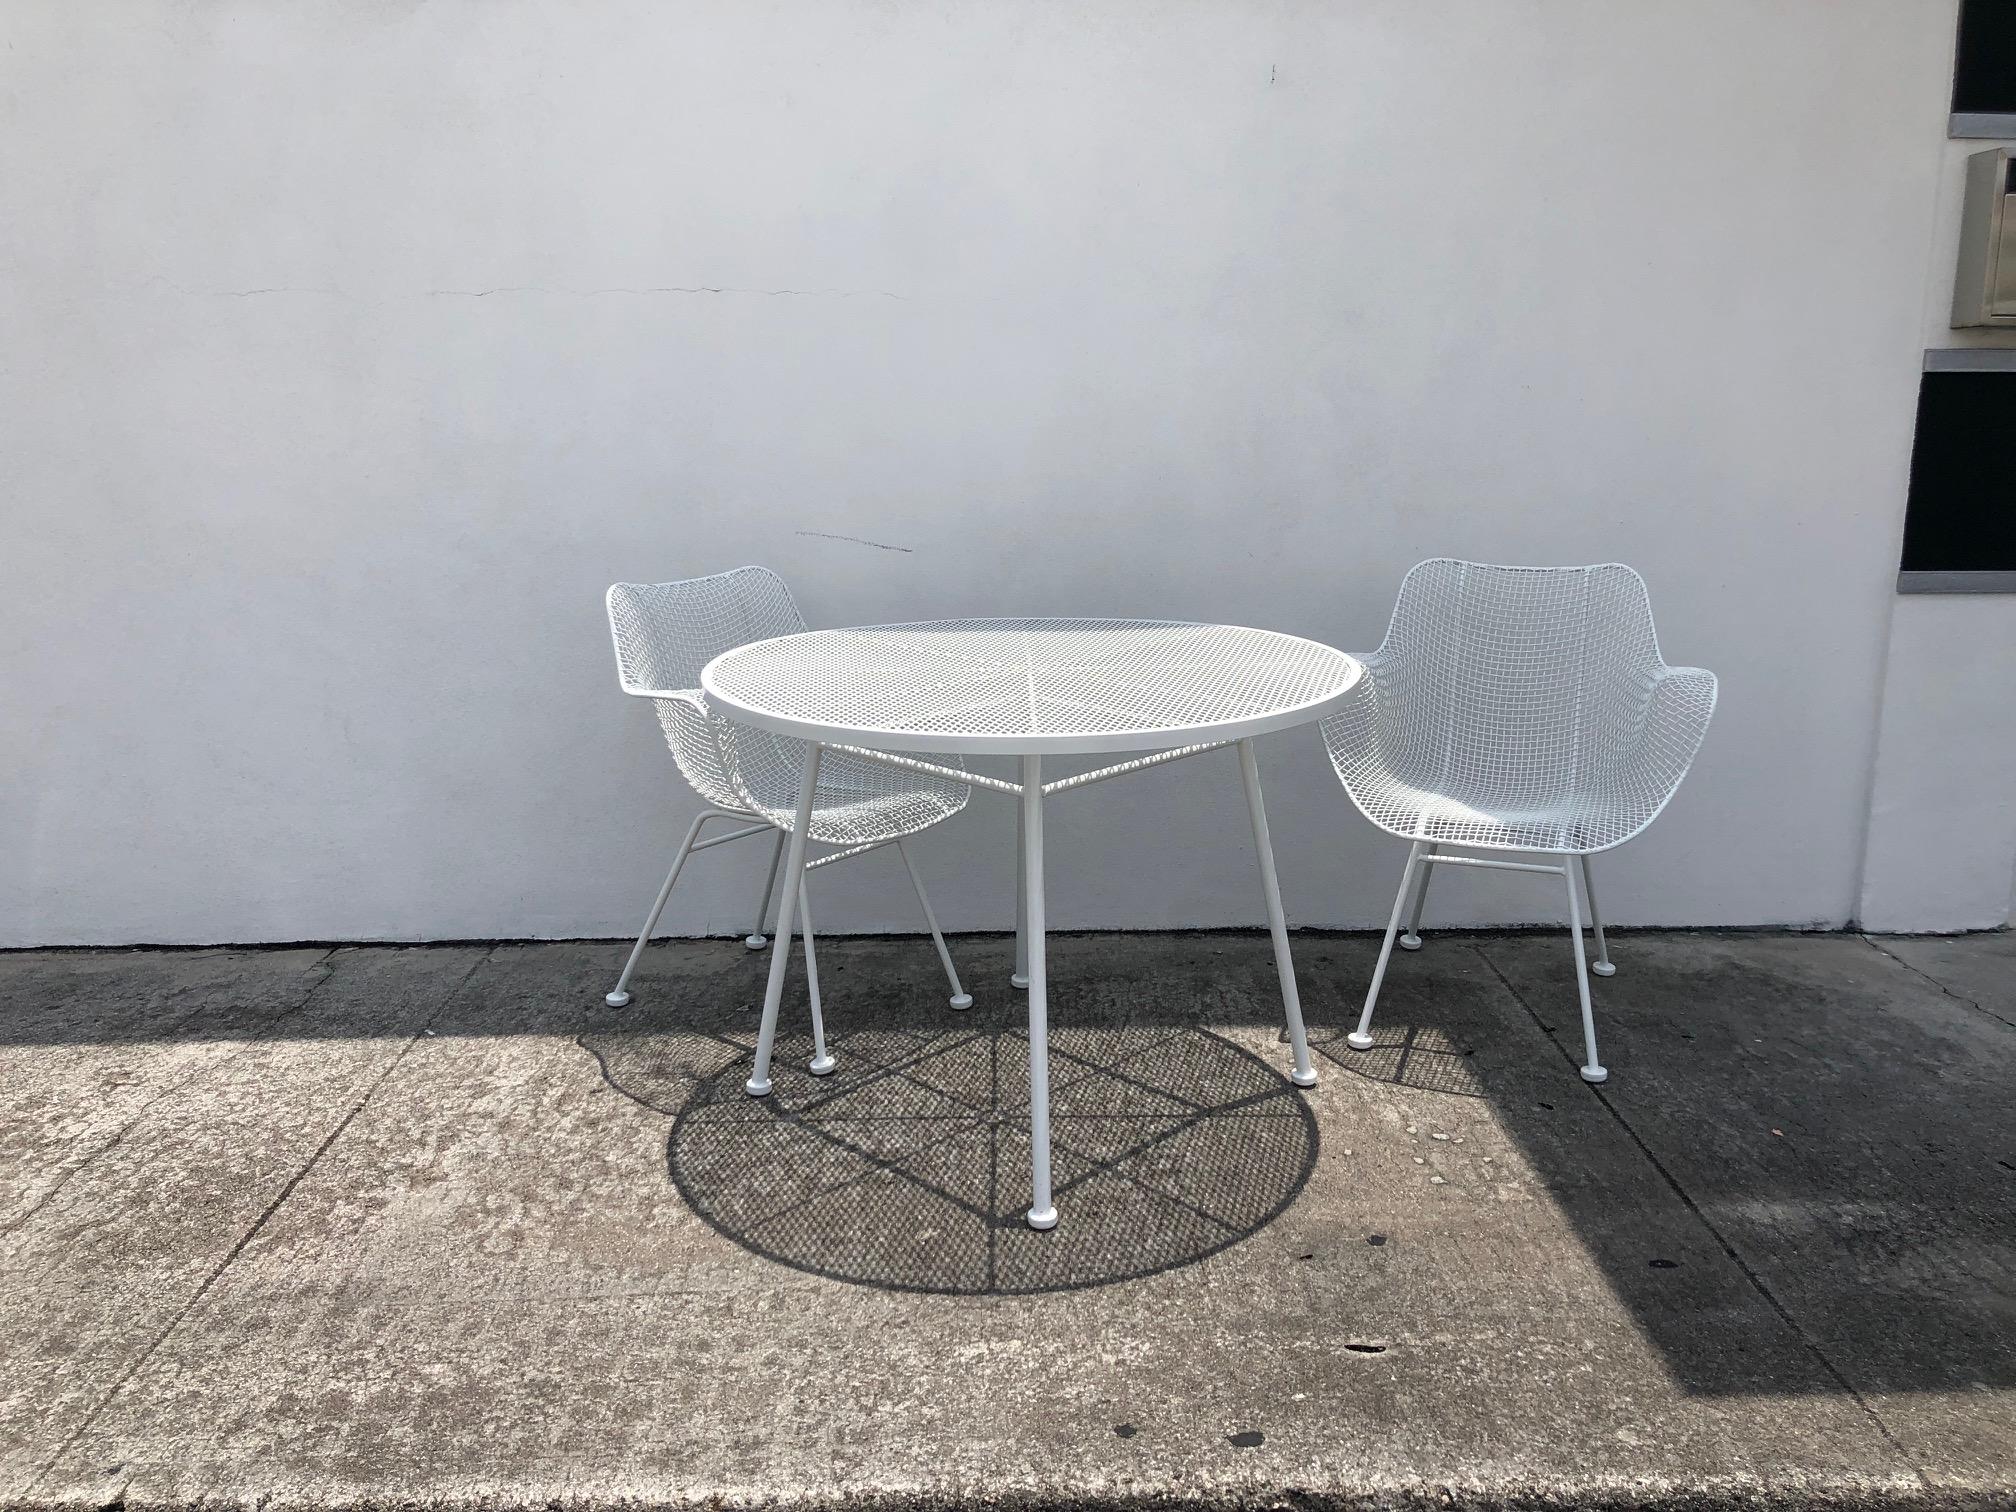 This stylish five piece set of Mid-Century Modern patio furniture was designed by Russell Woodard and is known as the 